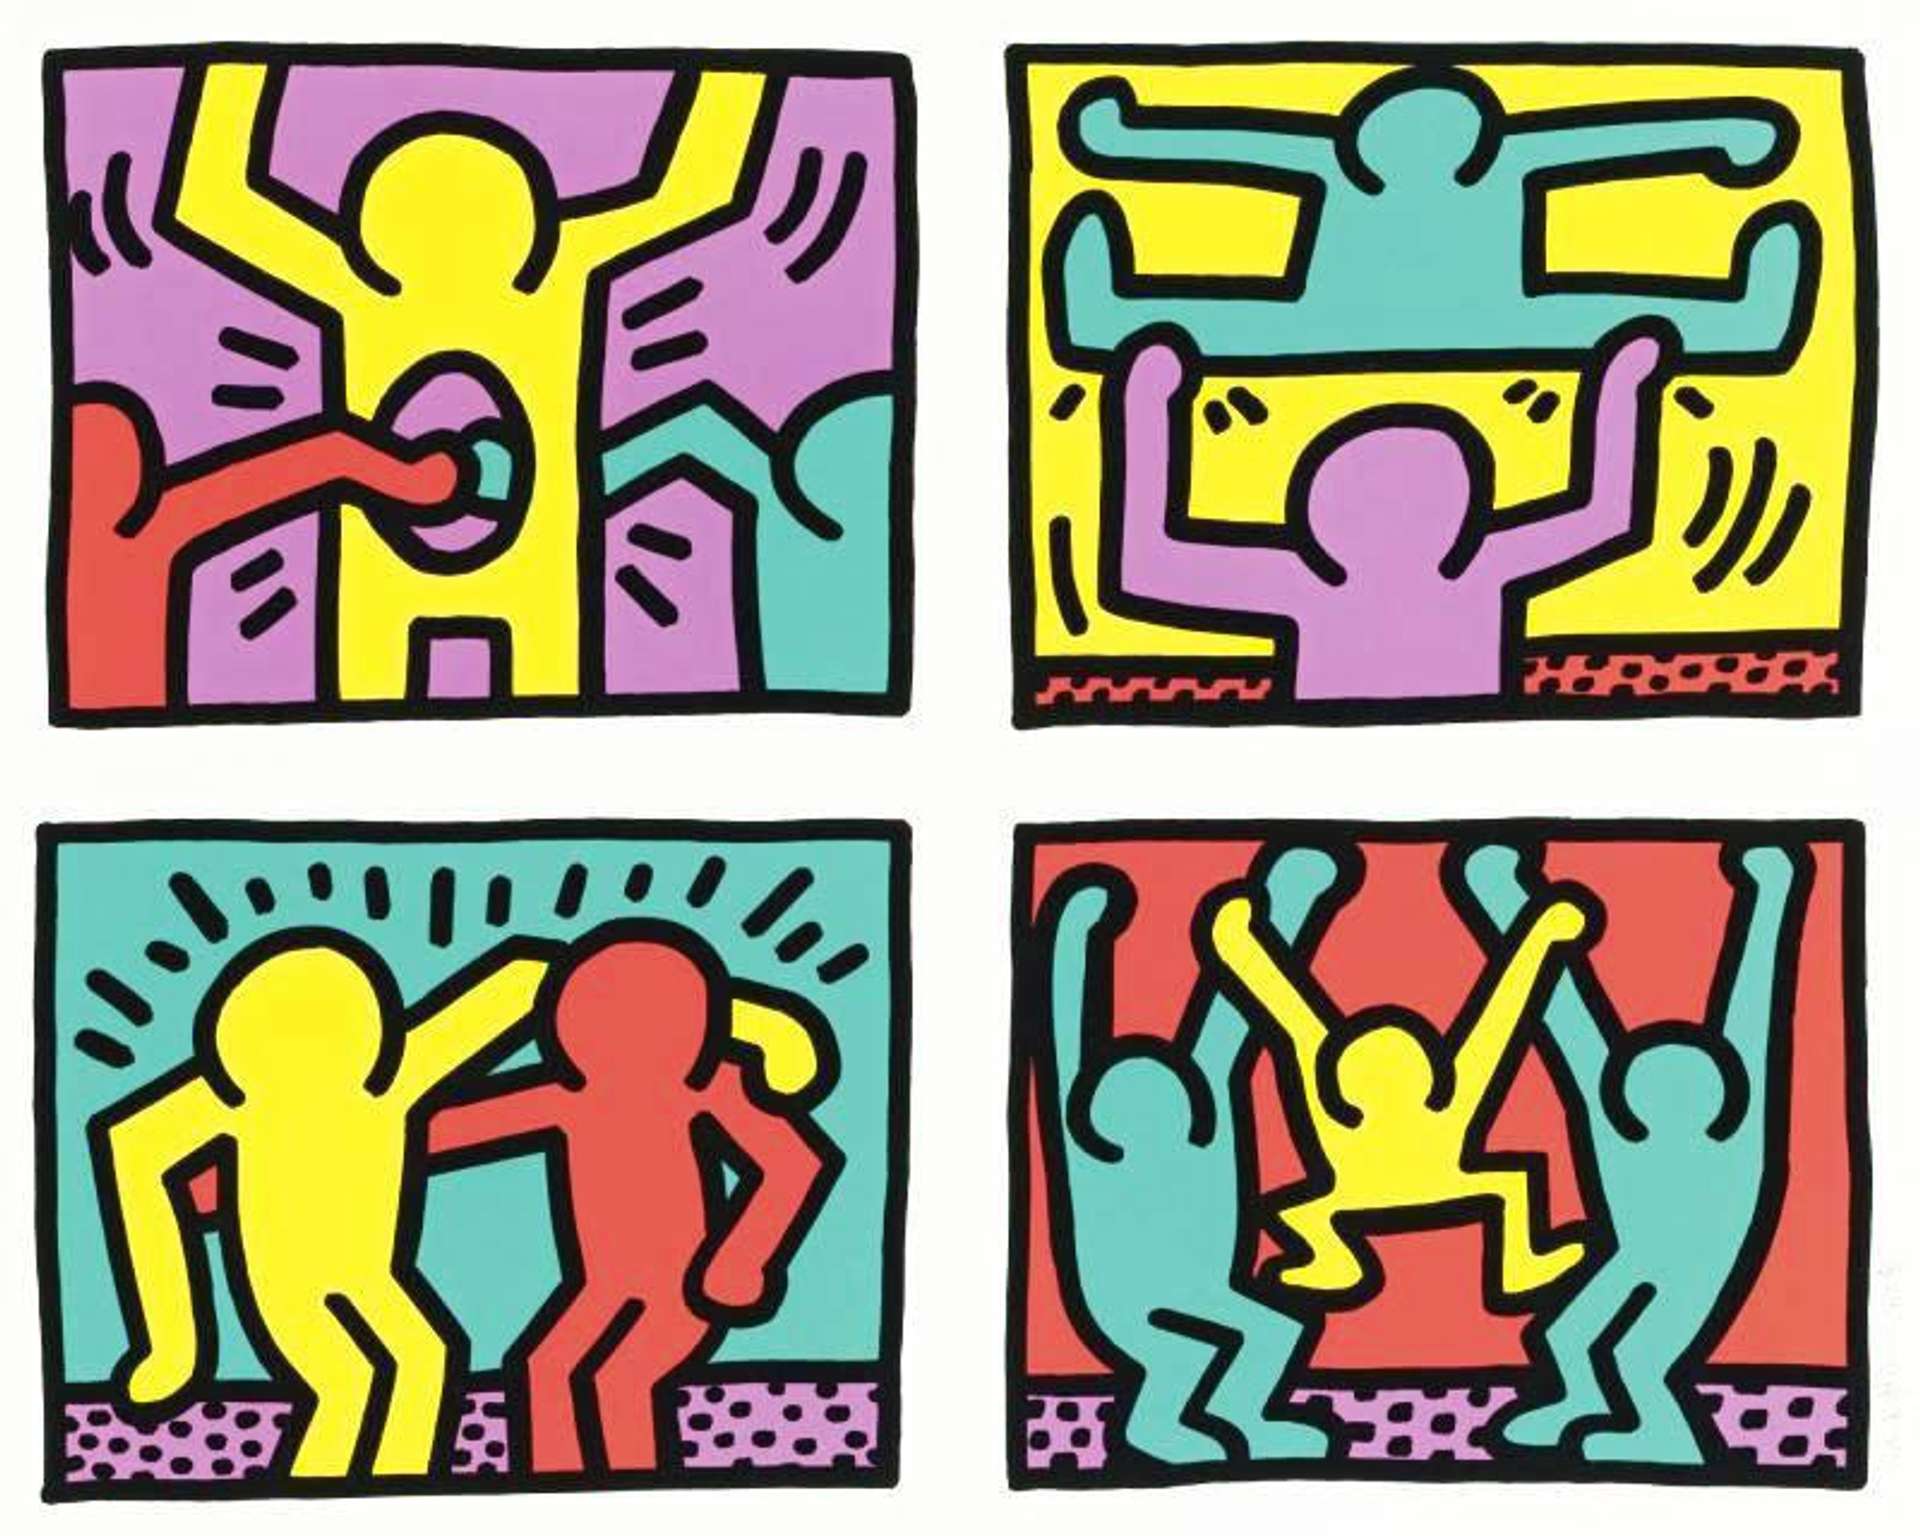 Four printed images of Keith Haring's iconic genderless faceless figures. The figures are drawn in bold black lines and are depicted against vibrant multi-colored backgrounds. They are shown dancing and hugging each other, exuding a sense of joy and movement.